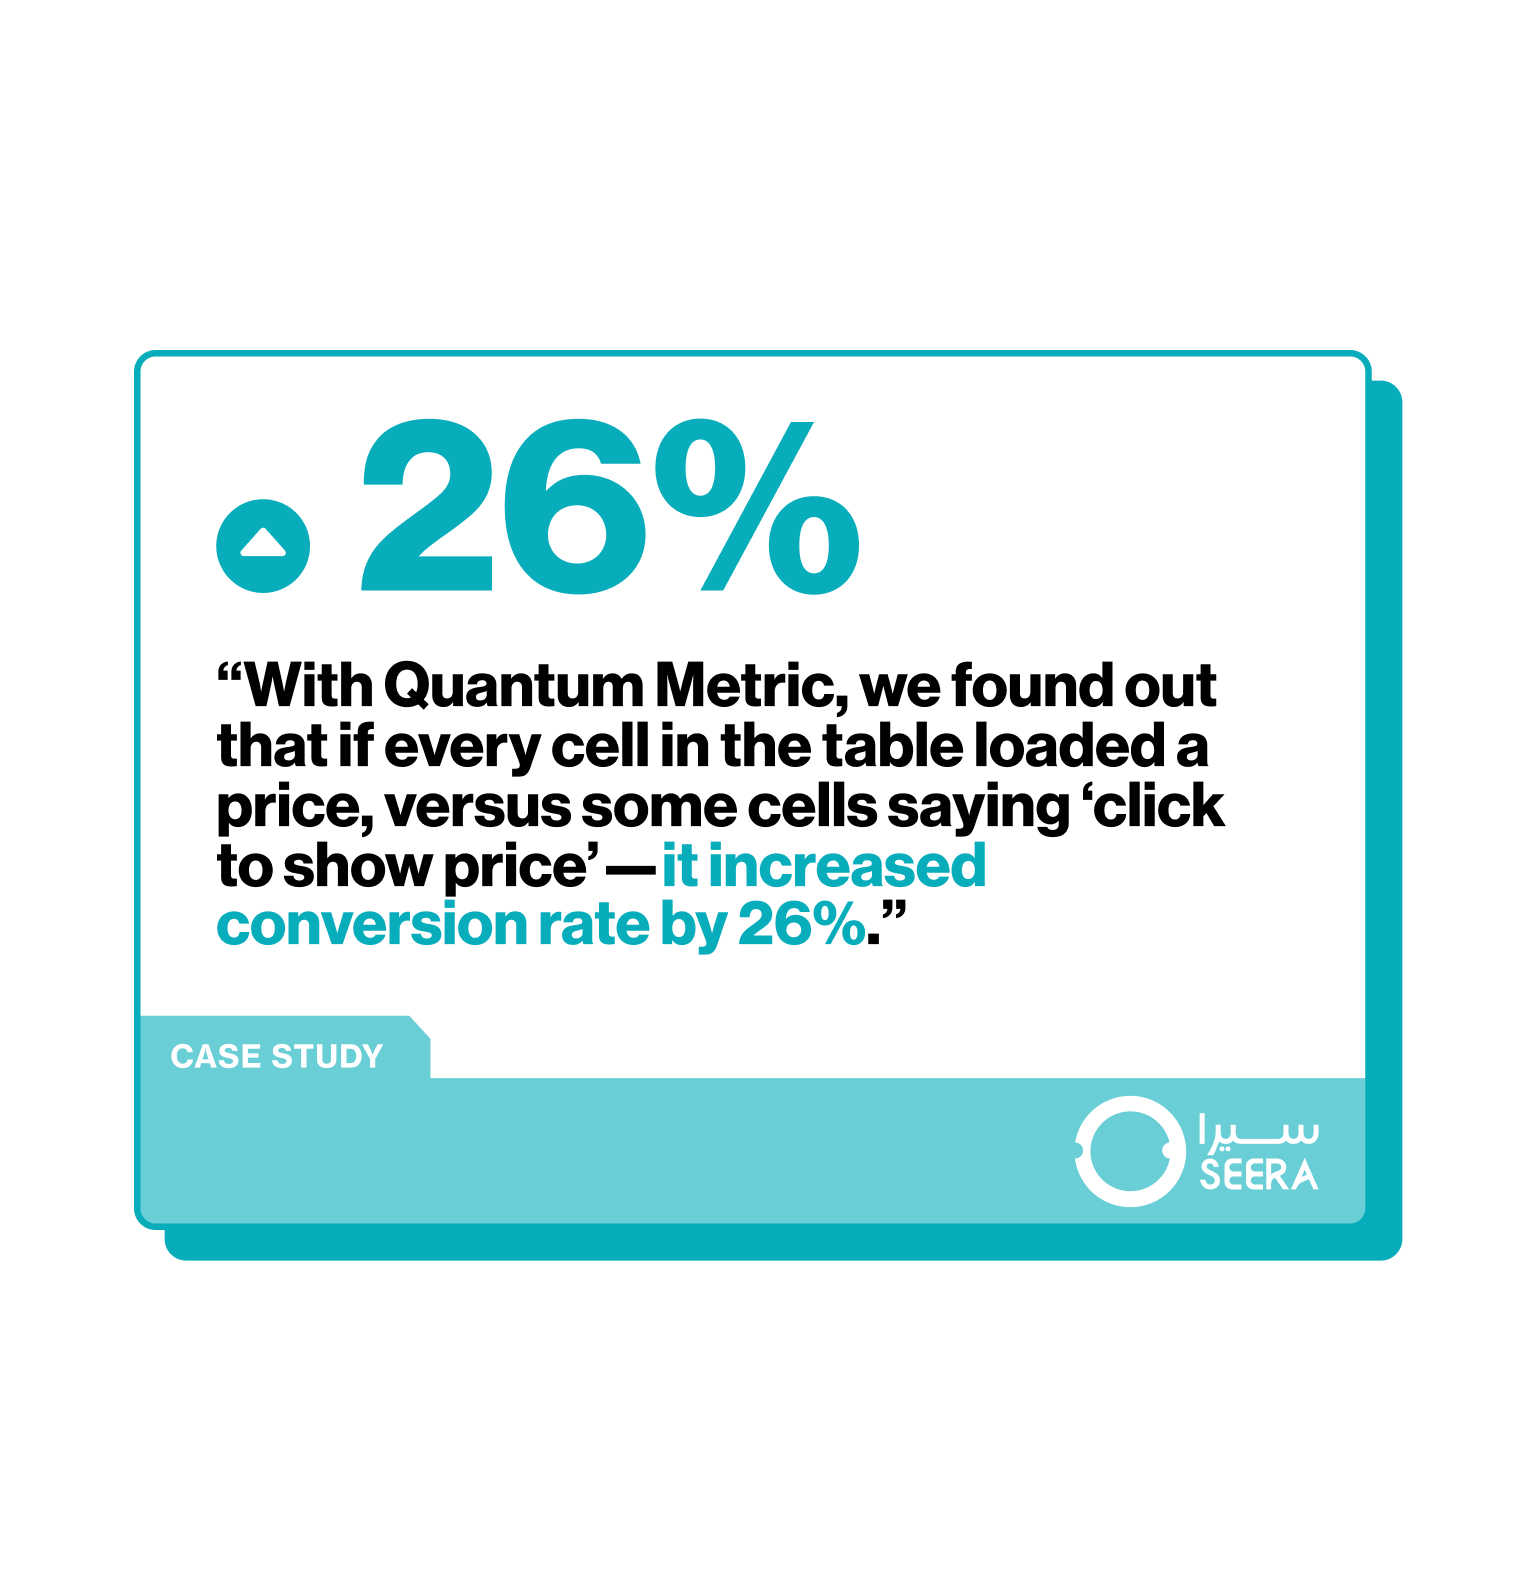 With Quantum Metric, we found out that if every cell in the table loaded a price, versus some cells saying 'click to show price'–it increased conversion rate by 26 percent.